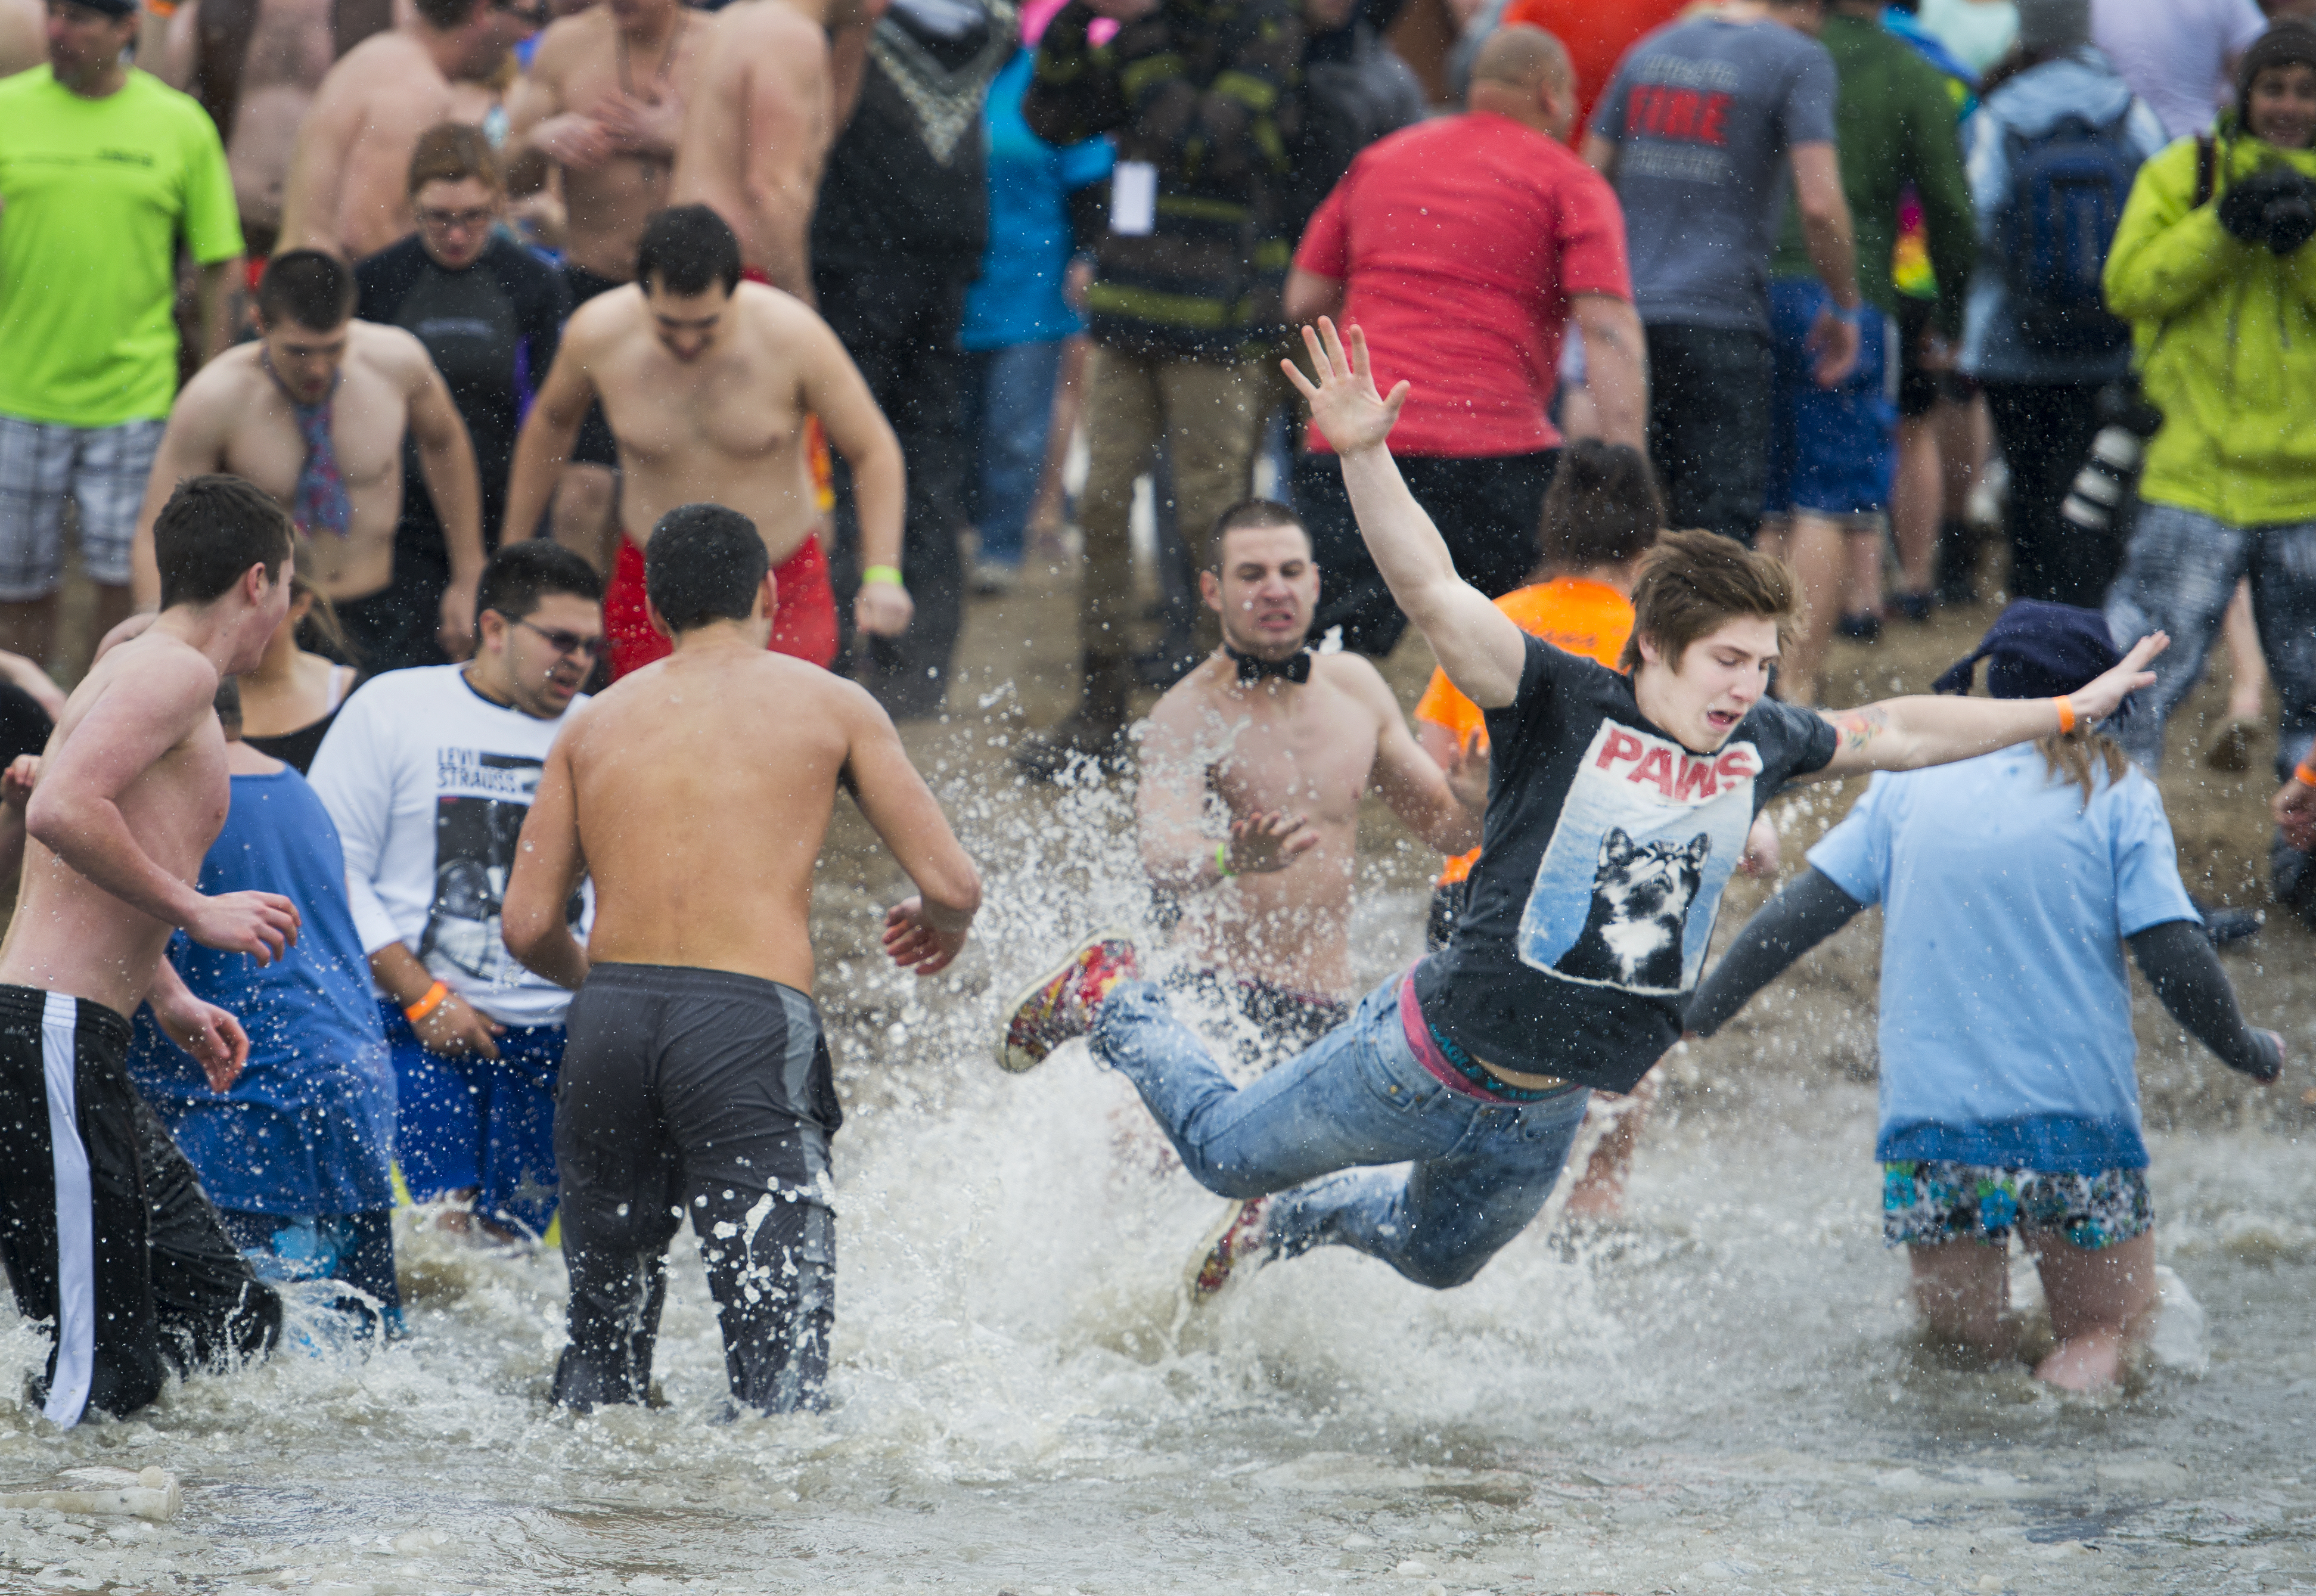 A young plunger belly flops into icy water during the Rochester Polar Bear Plunge at Charlotte Beach in Rochester, New York on February 9, 2014. Photo by Tom Brenner 